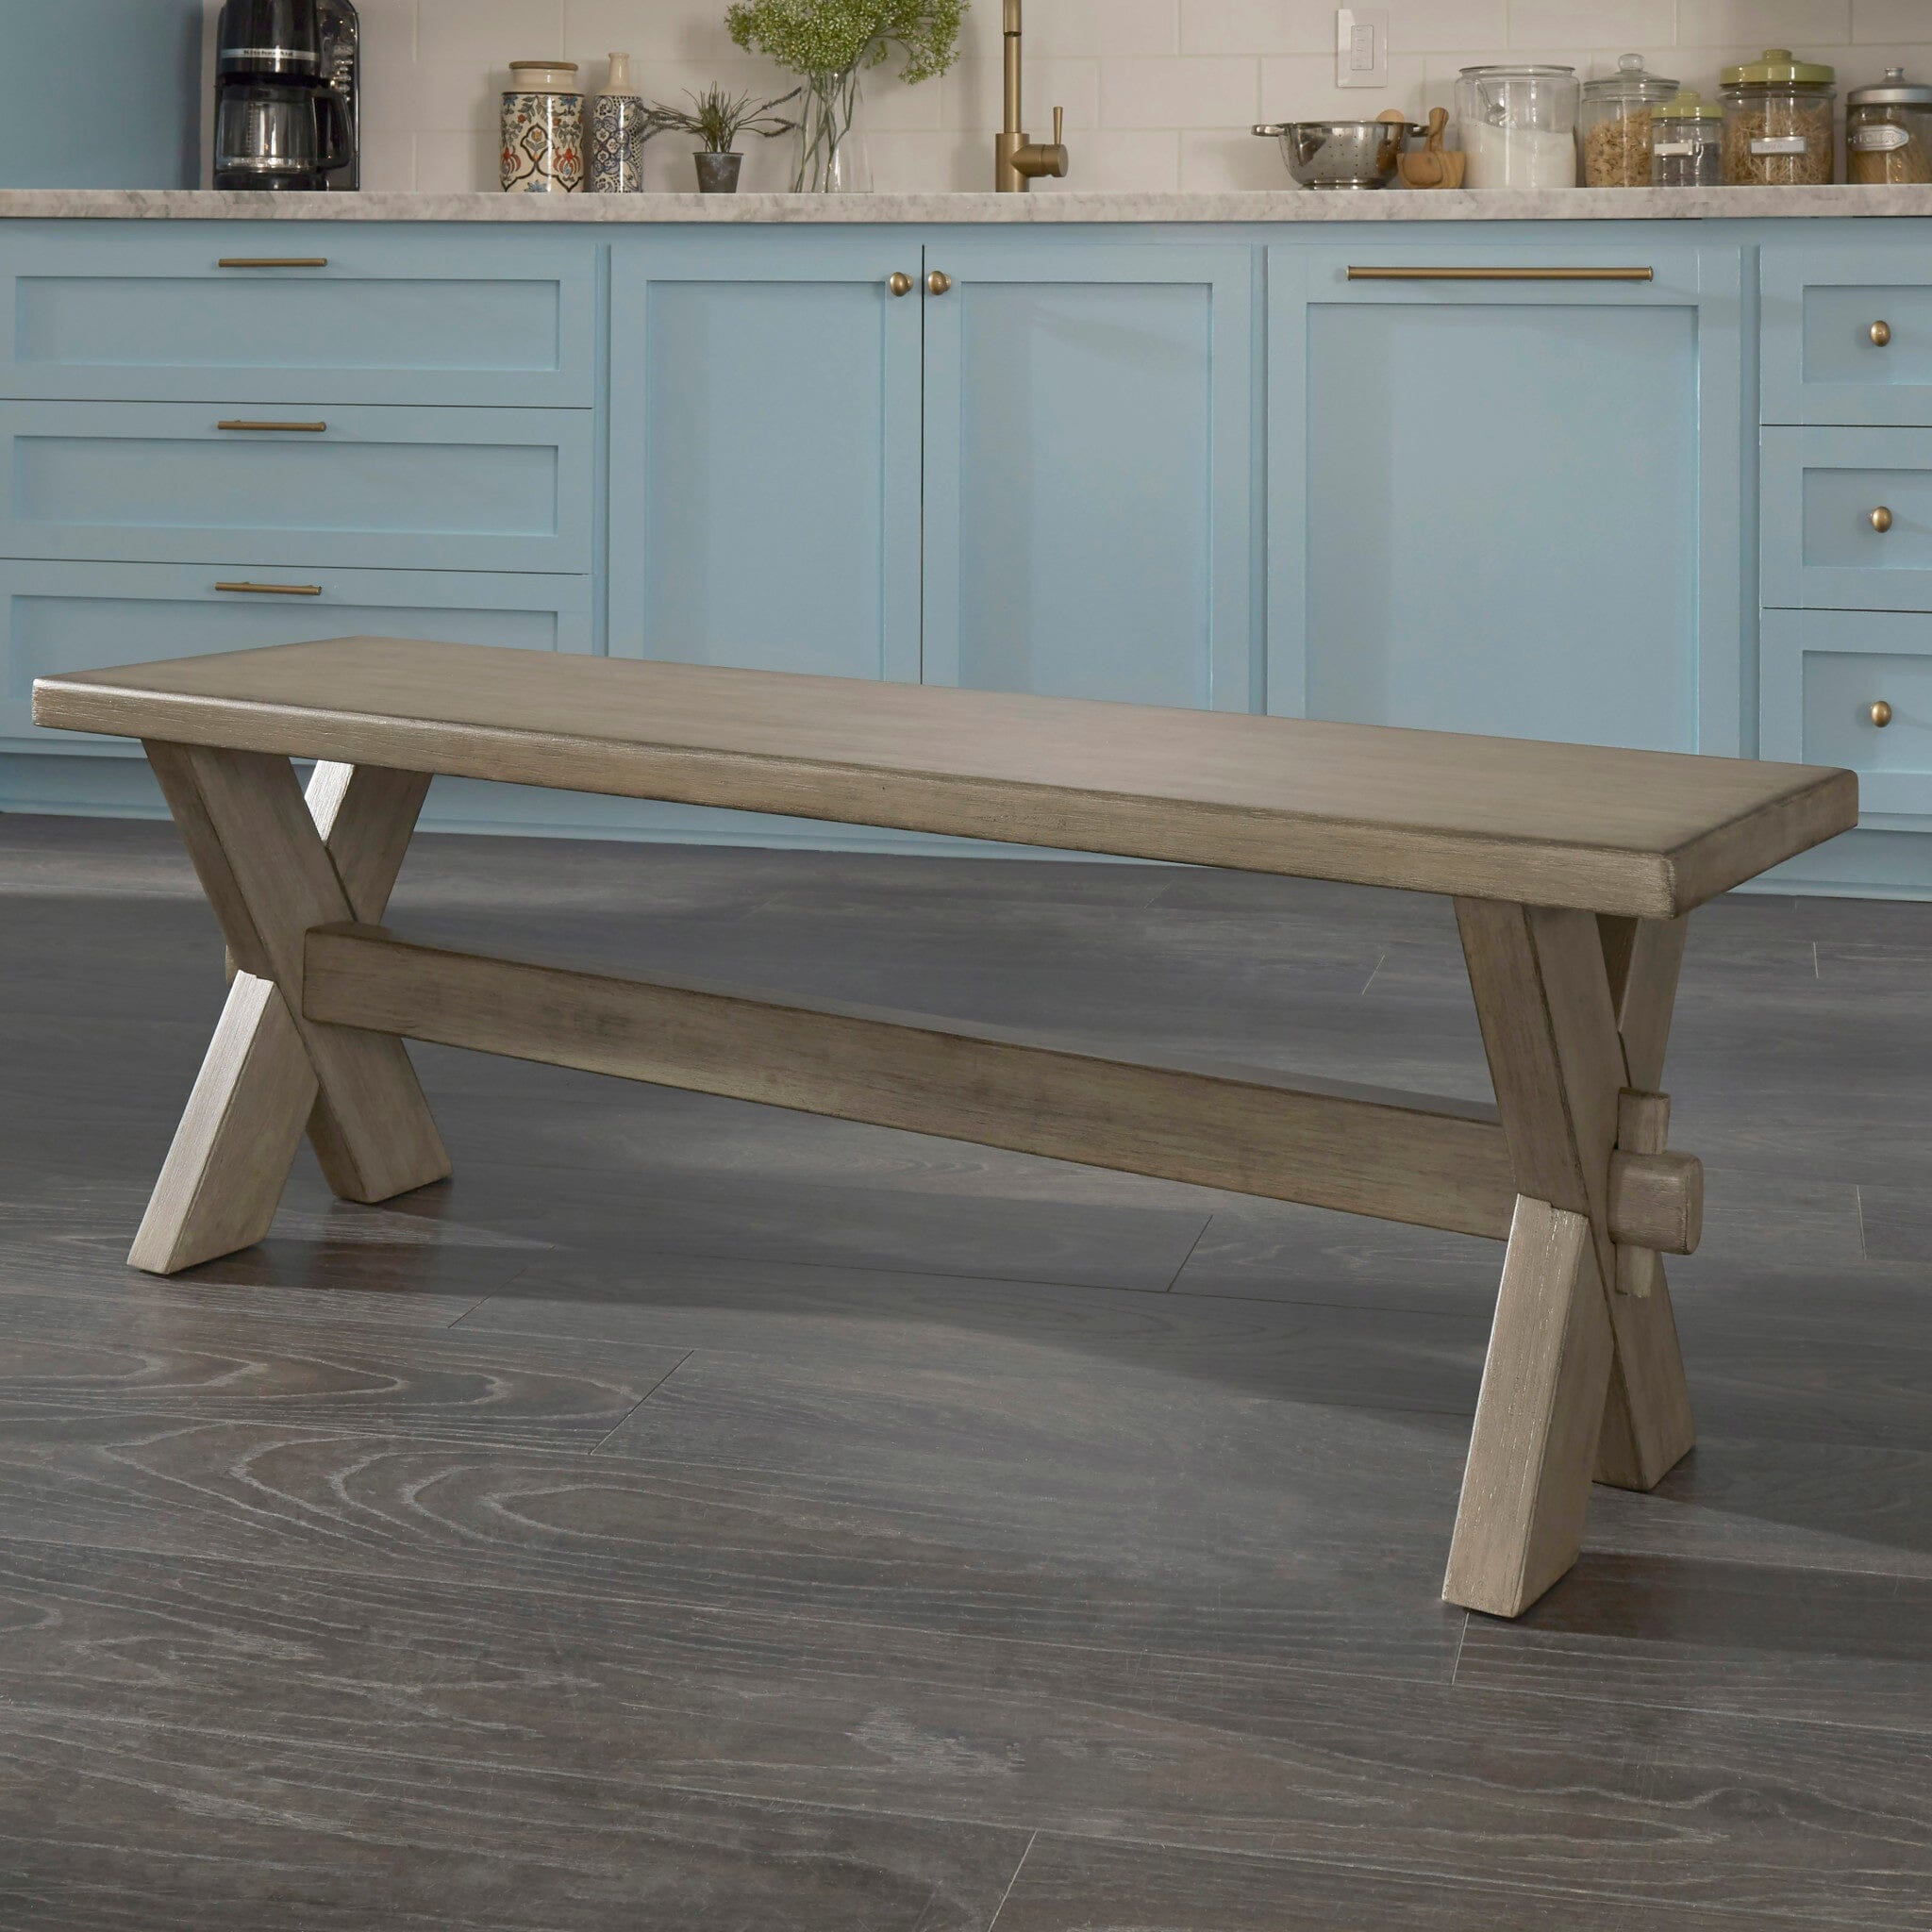 Rustic Farmhouse Dining Bench By Mountain Lodge Dining Bench Mountain Lodge